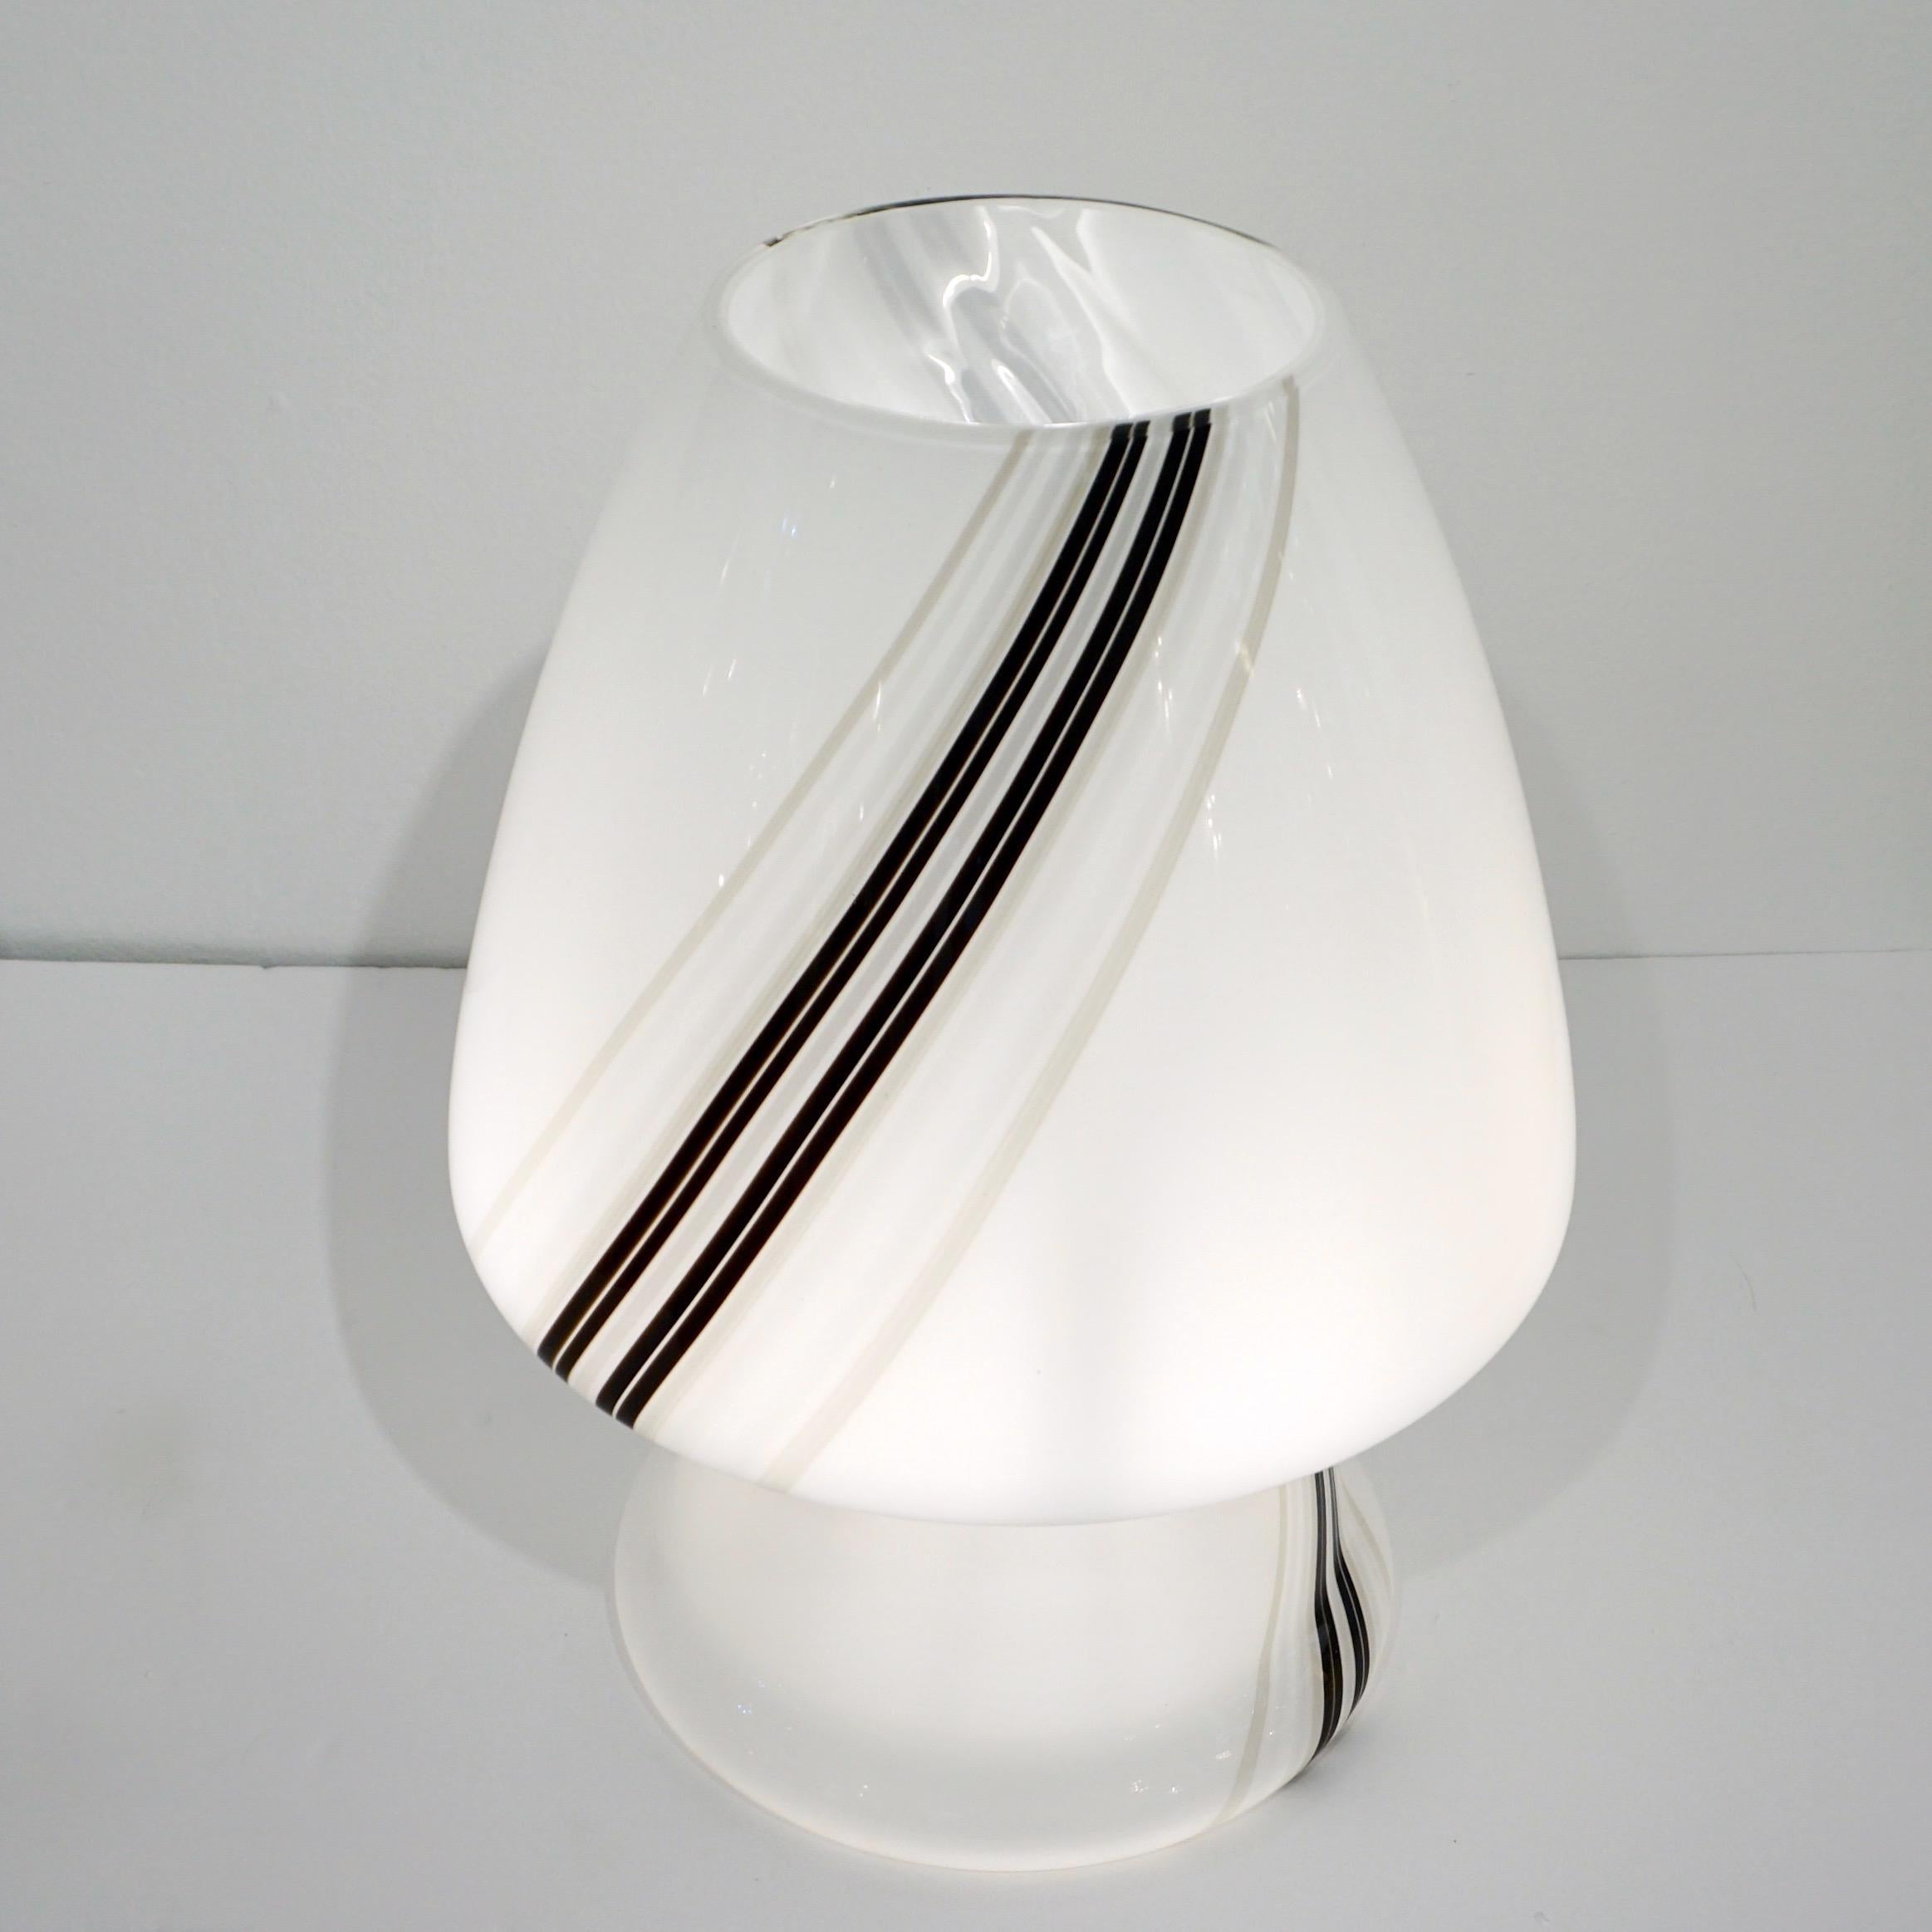 Vintage 1970s Italian Large White Lamp with Black Murrine Attributed to Vistosi For Sale 5